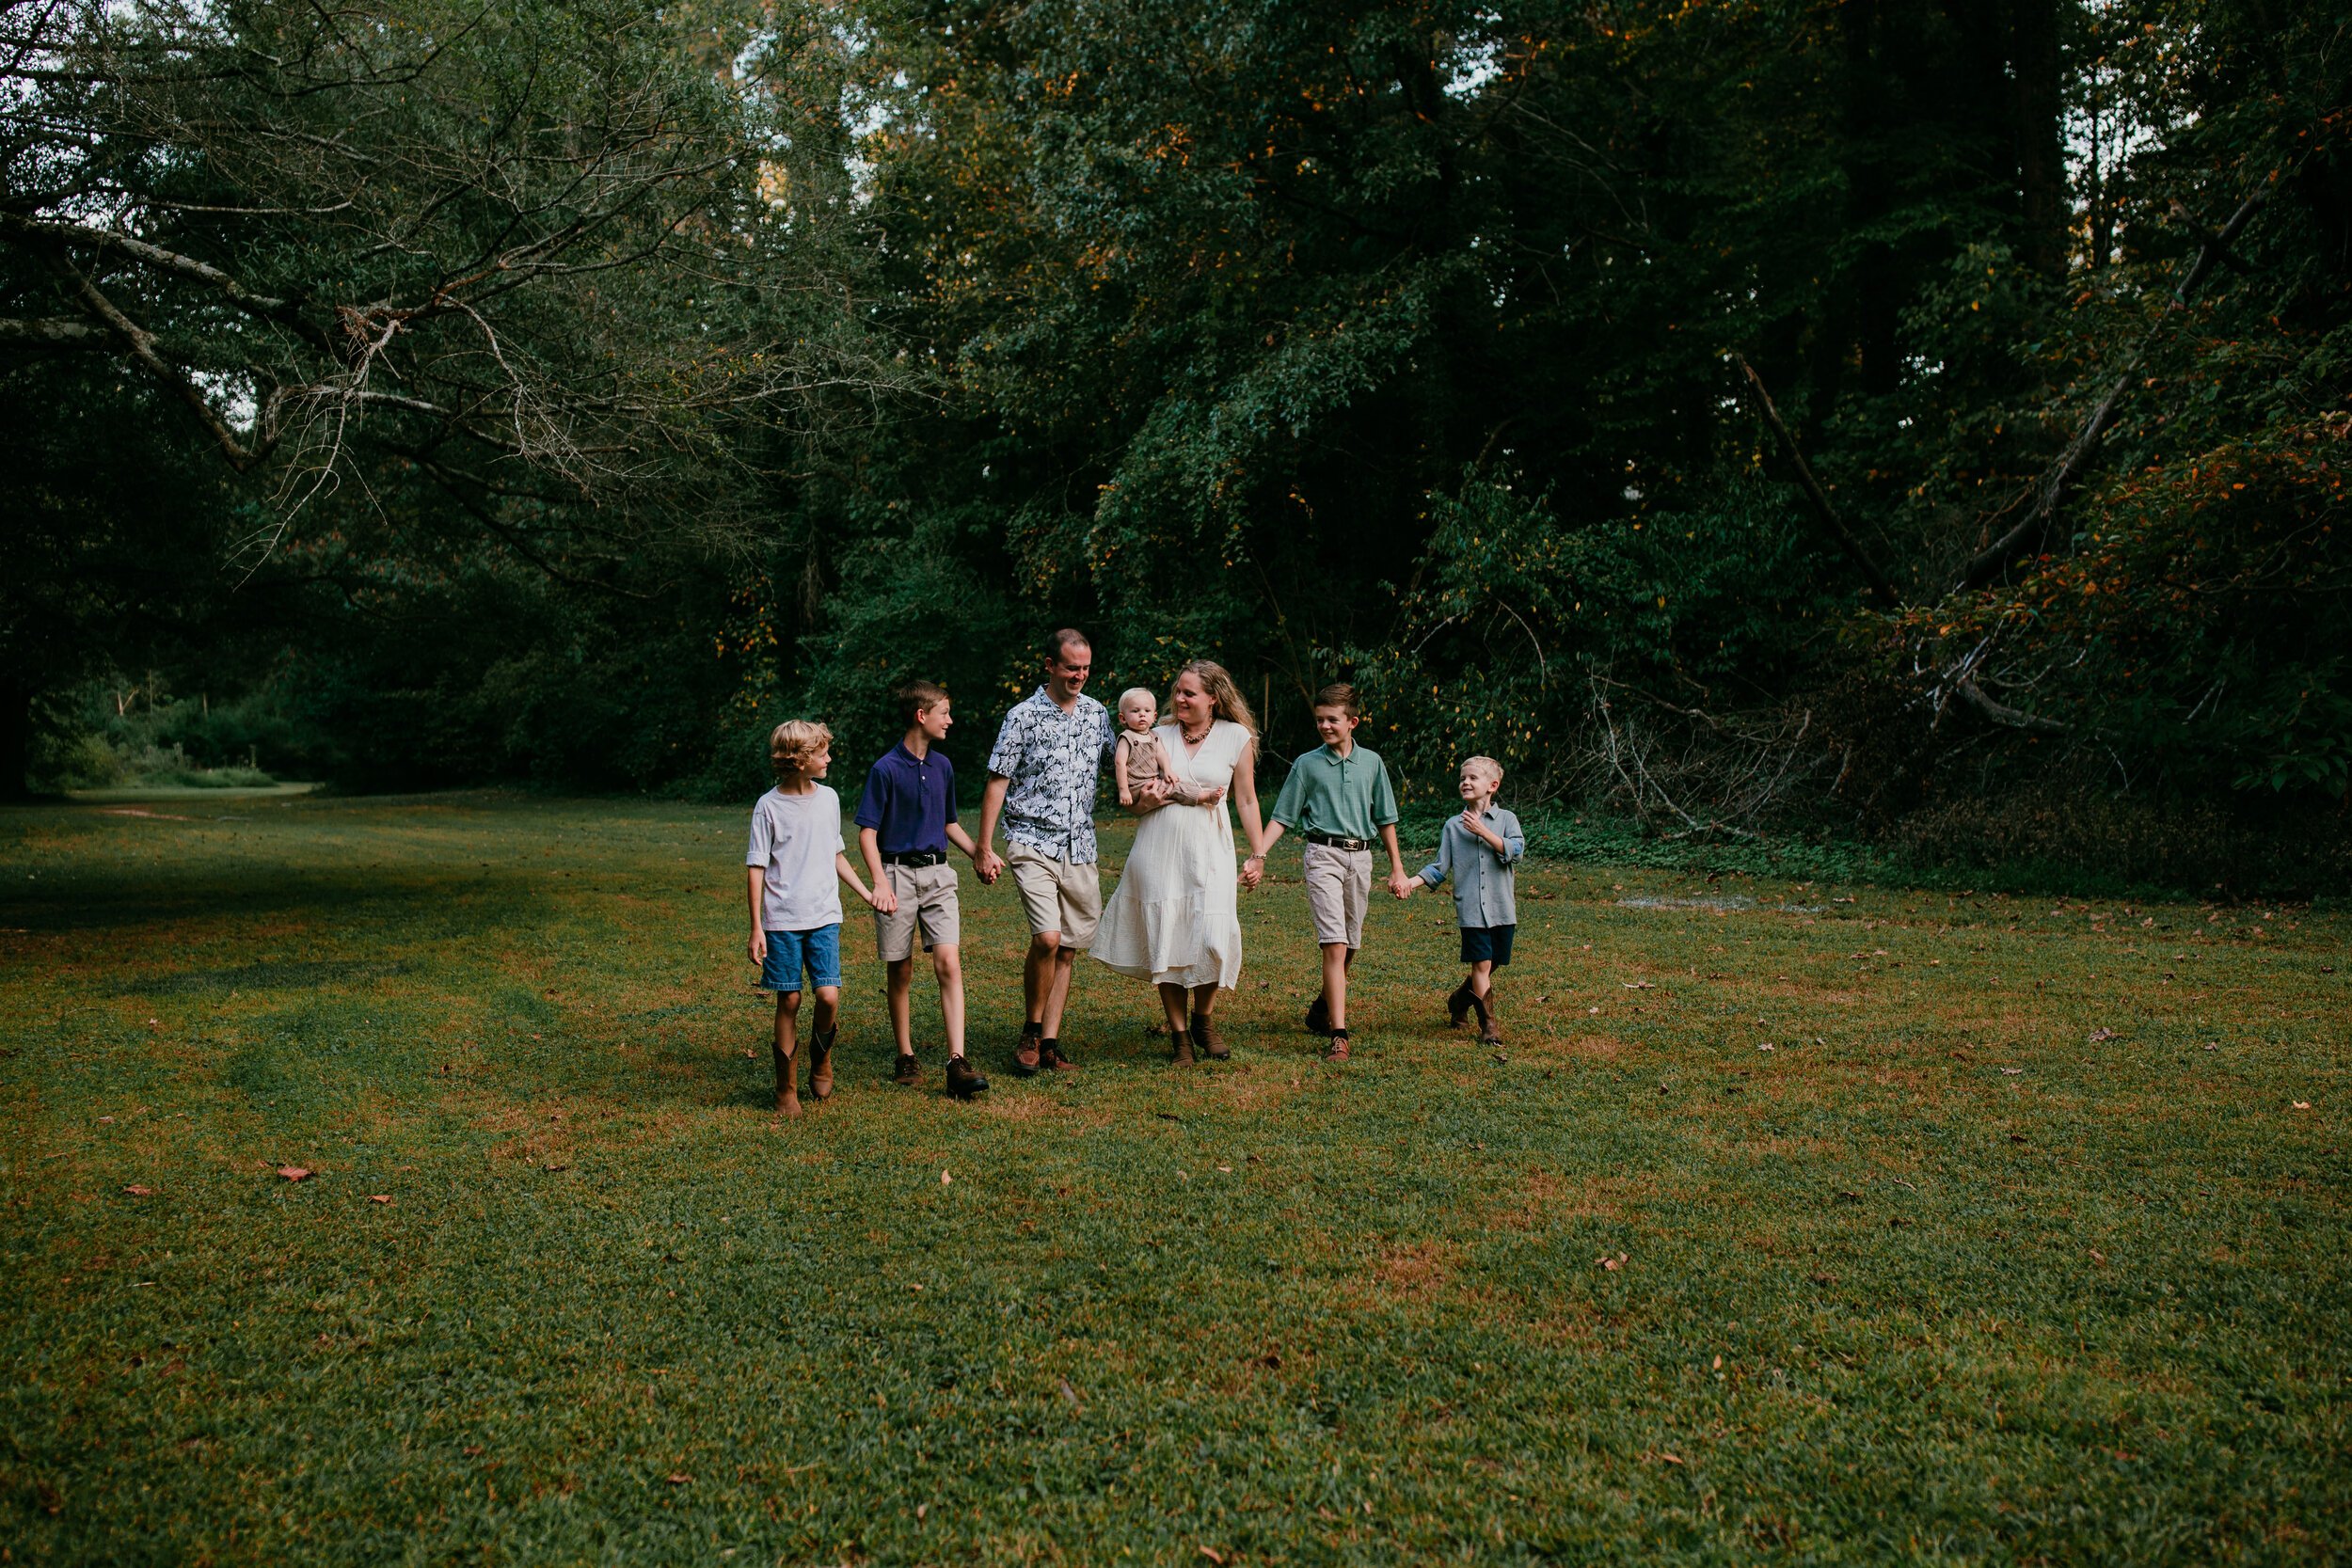 large family walks together hand in hand in green tree lined field